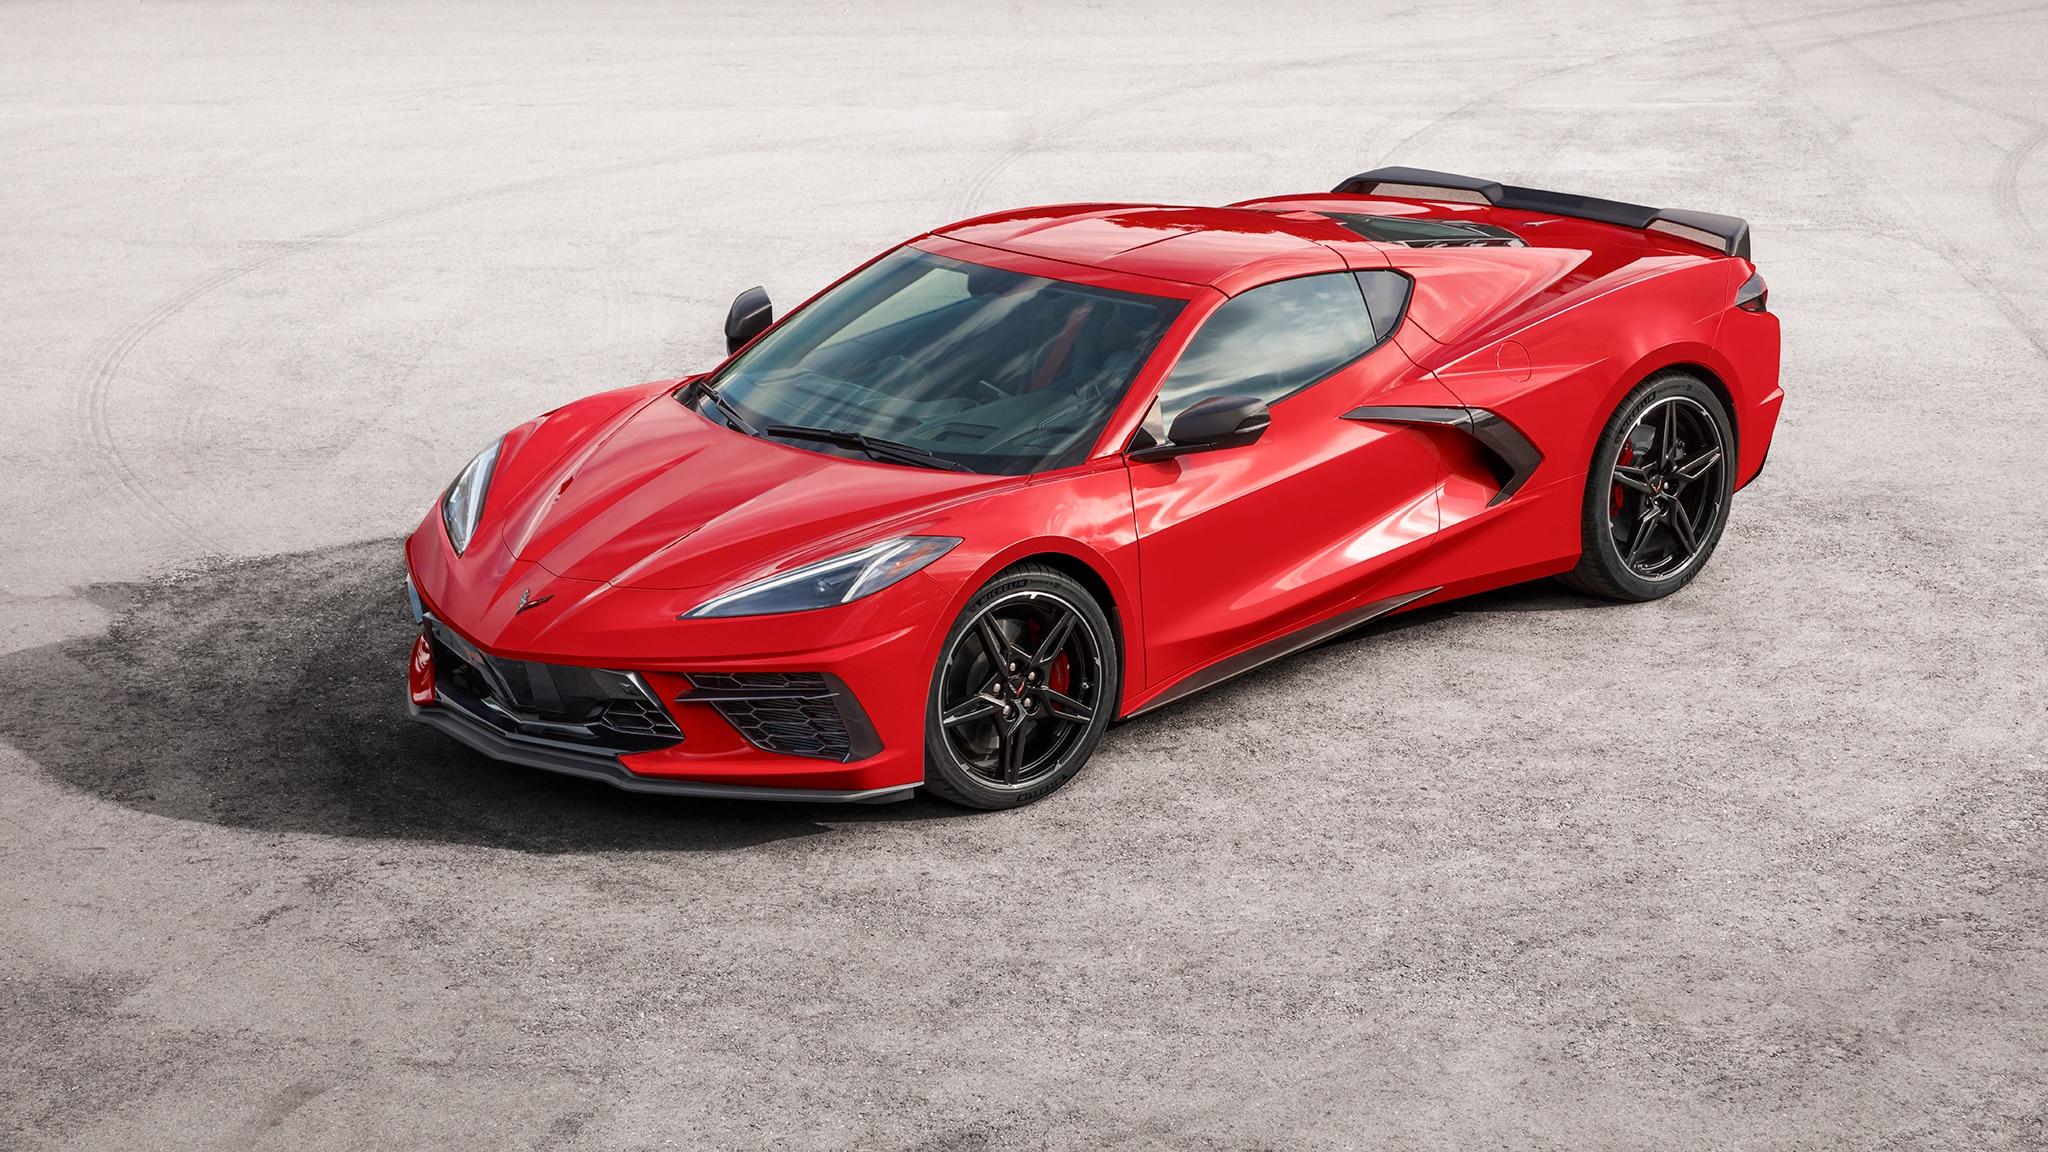 Mid Engine Chevrolet Corvette: All The Photo And Details